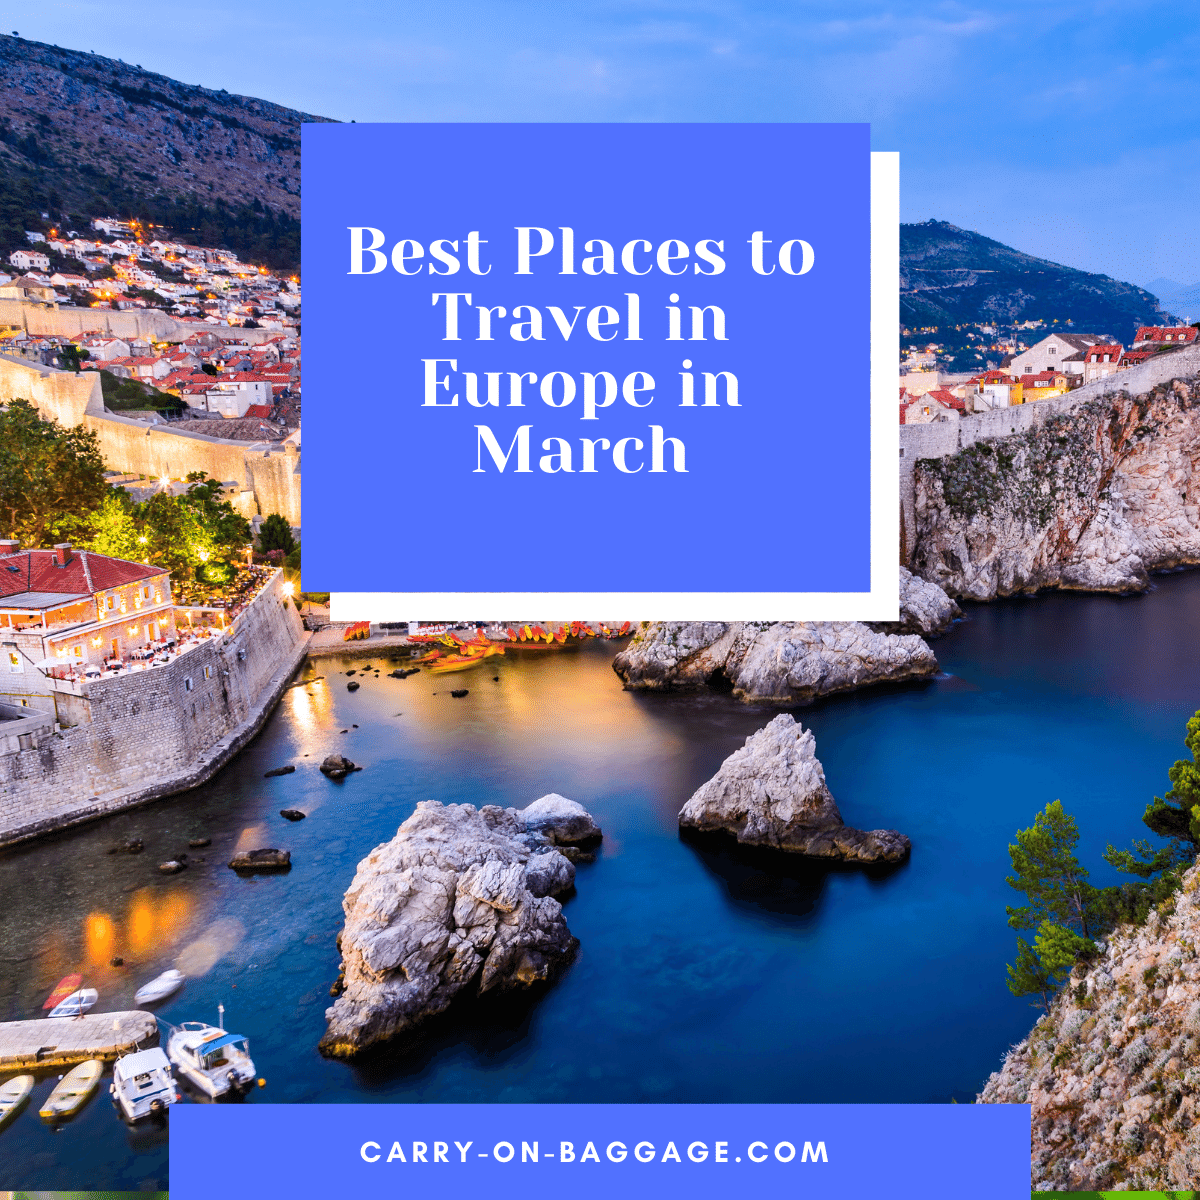 Best Places to Travel in Europe in March